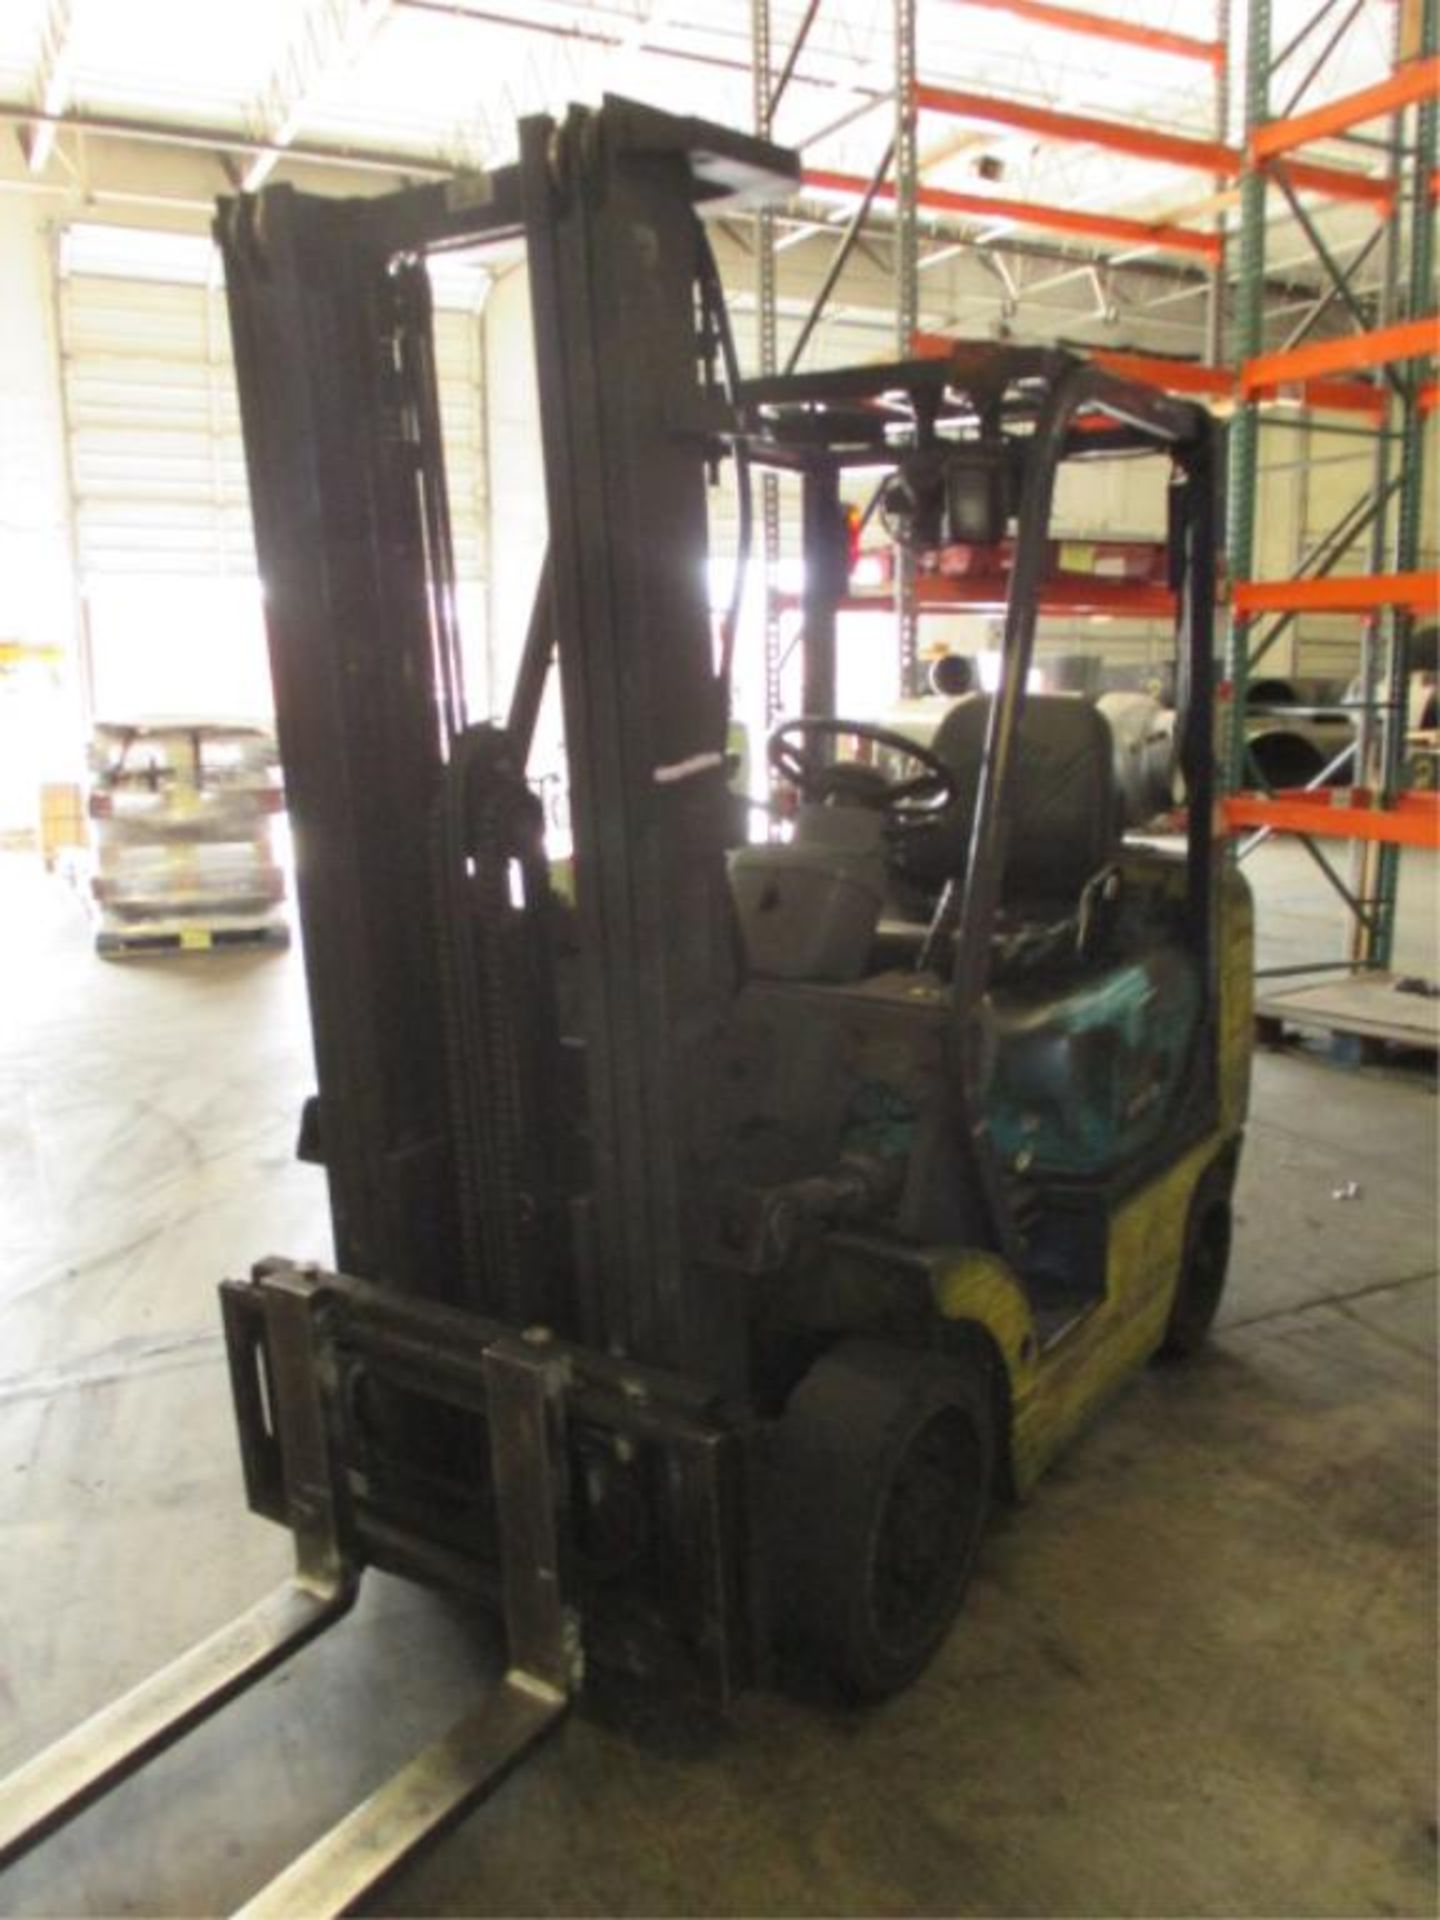 Komatsu FG25ST-12 4-Wheel LP Gas Forklift Truck [propane not included]. Hours: 10897.8; Triple-Stage